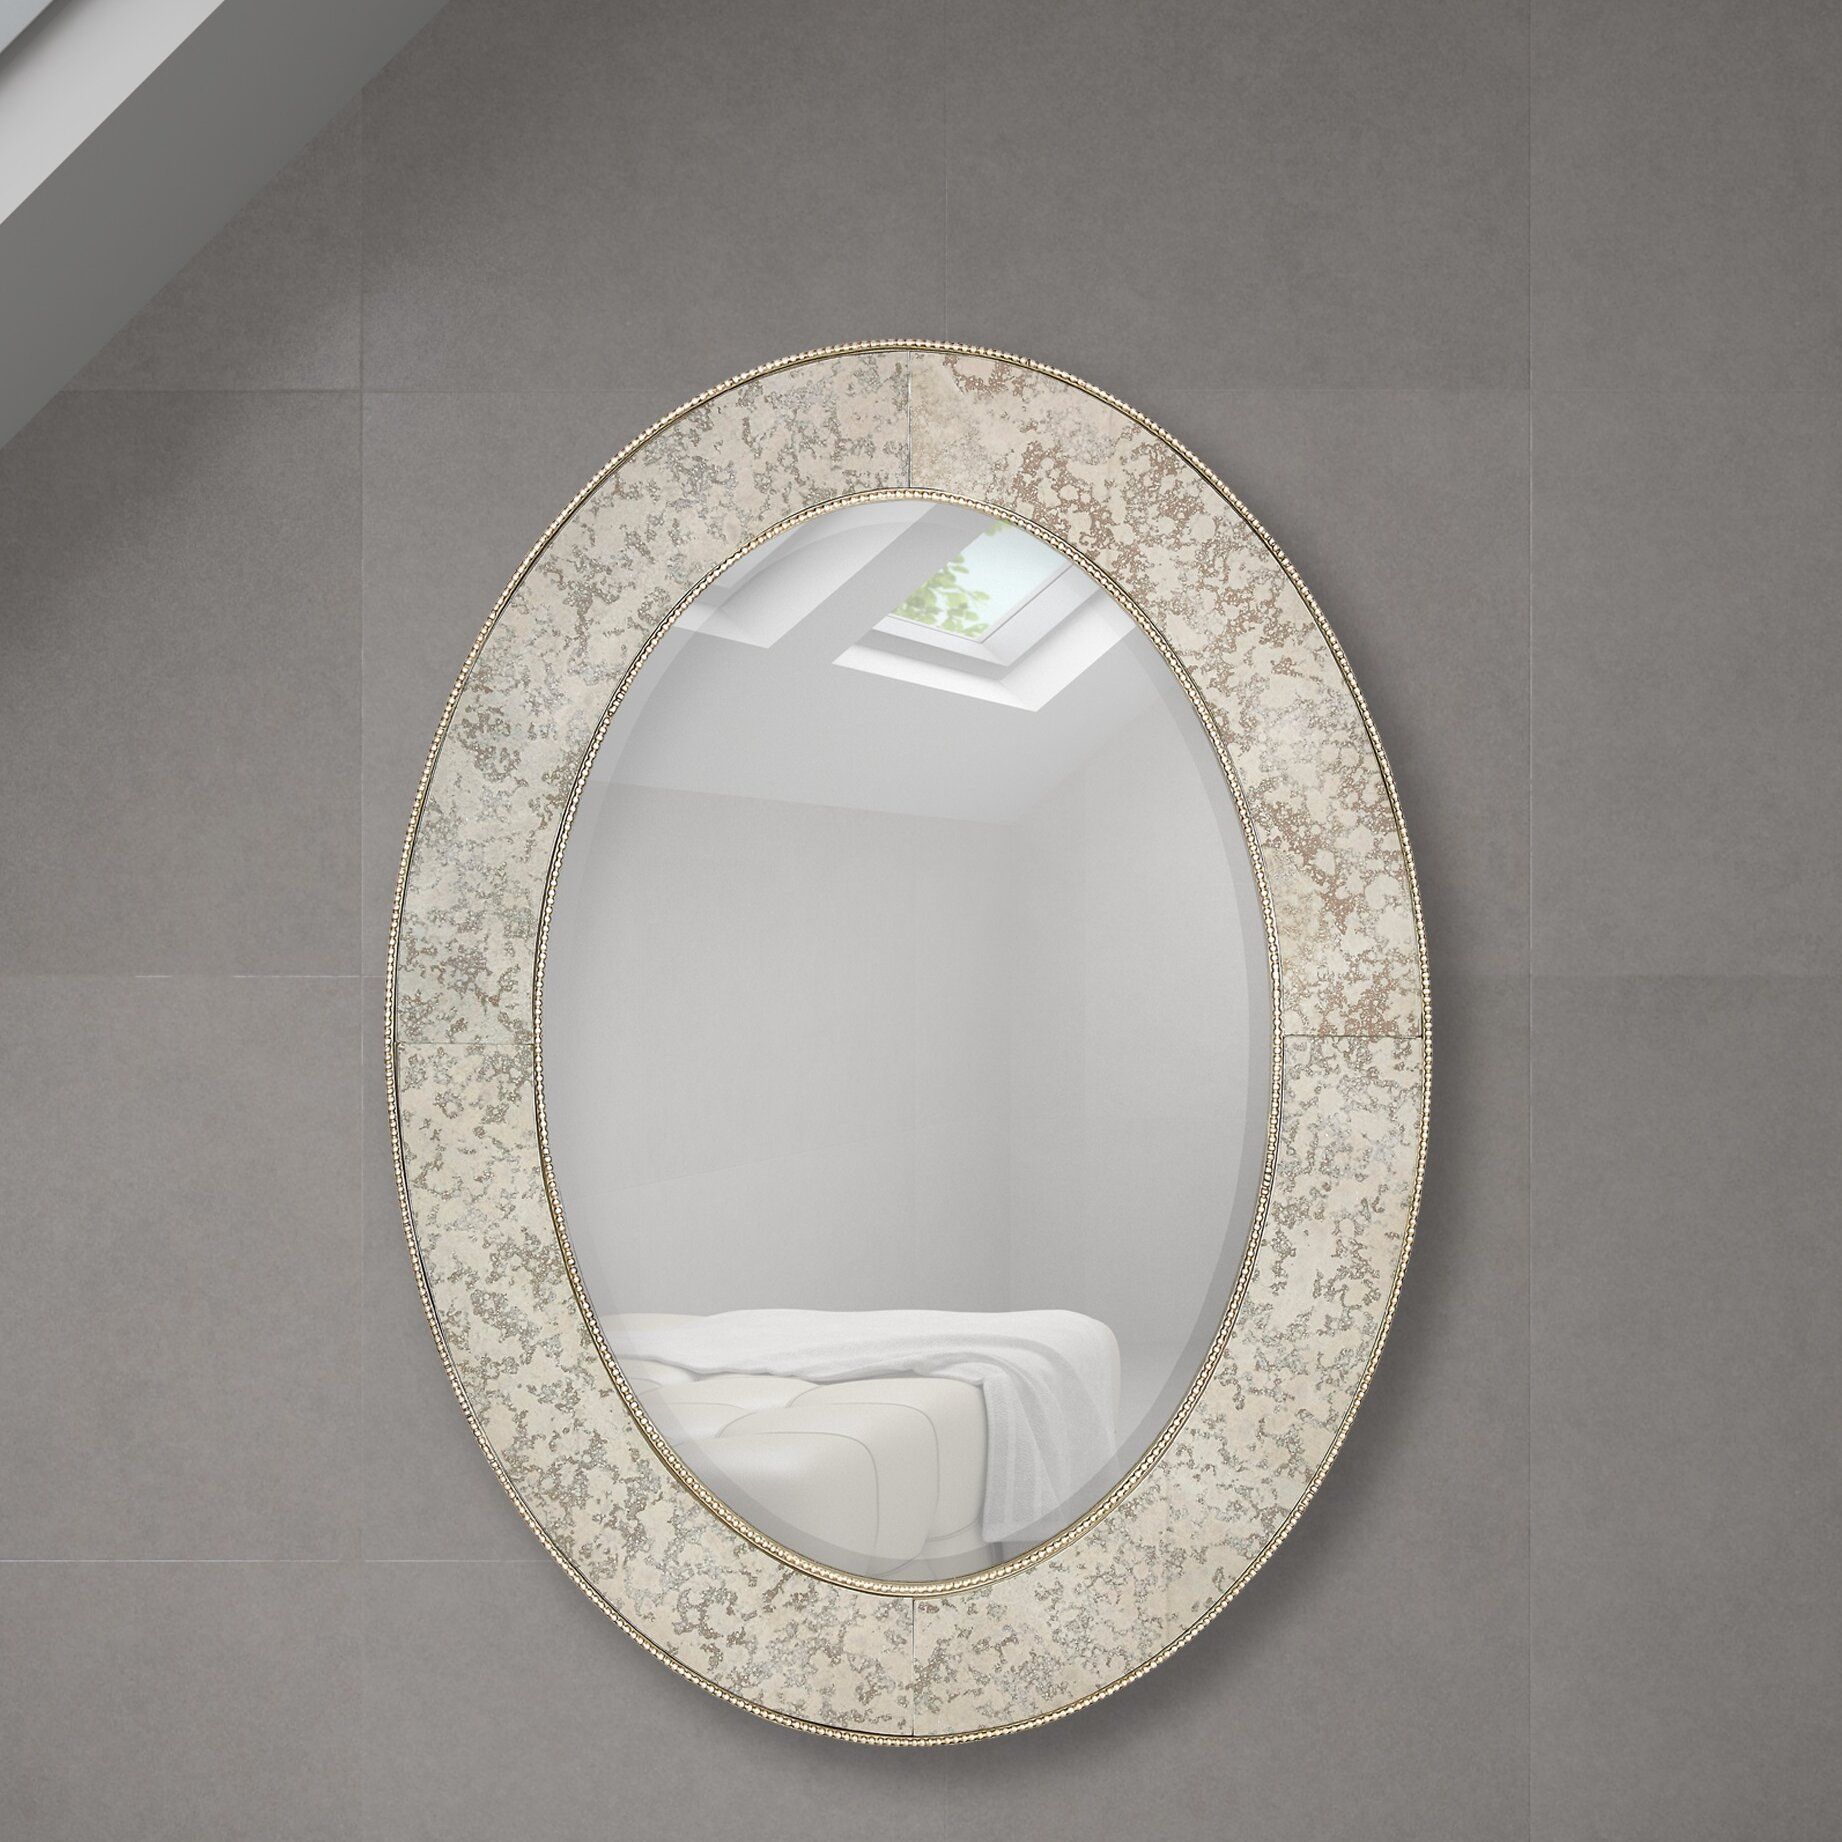 Majestic Mirror Classy Oval Shape Framed Beveled Glass Wall Mirror In Black Oval Cut Wall Mirrors (Photo 4 of 15)